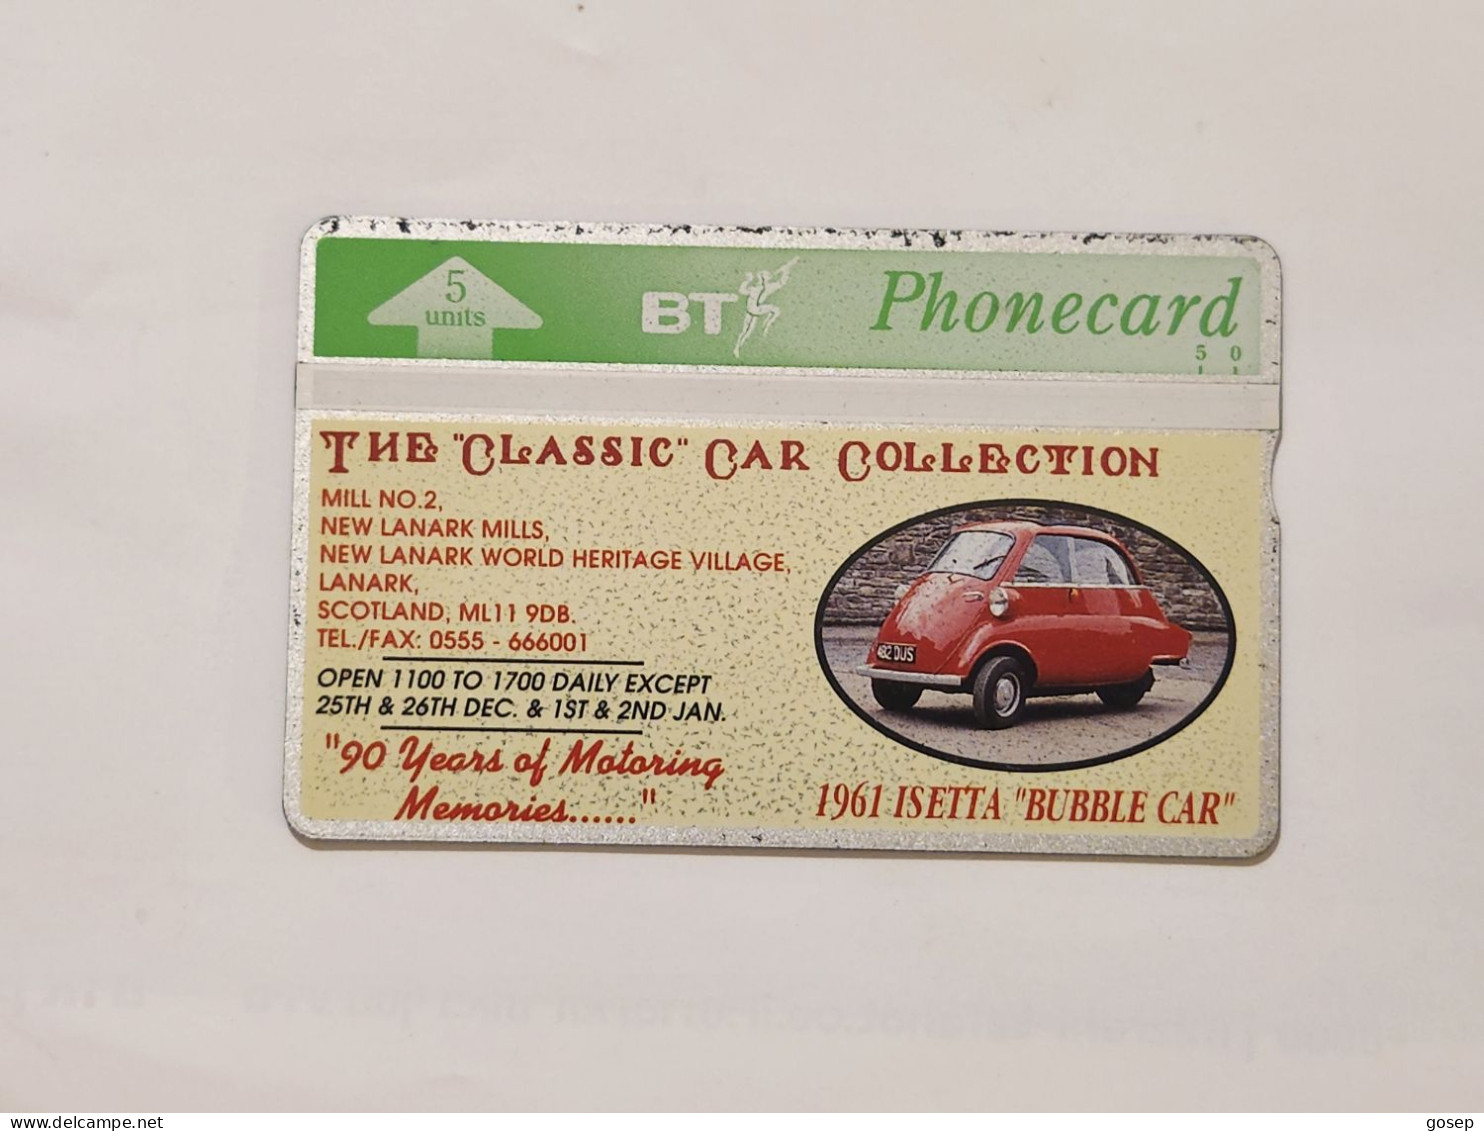 United Kingdom-(BTG-207)-Classic Car Collecting-(2)-(436)(311D32637)(tirage-2.000)-price Cataloge-6.00£-mint - BT General Issues